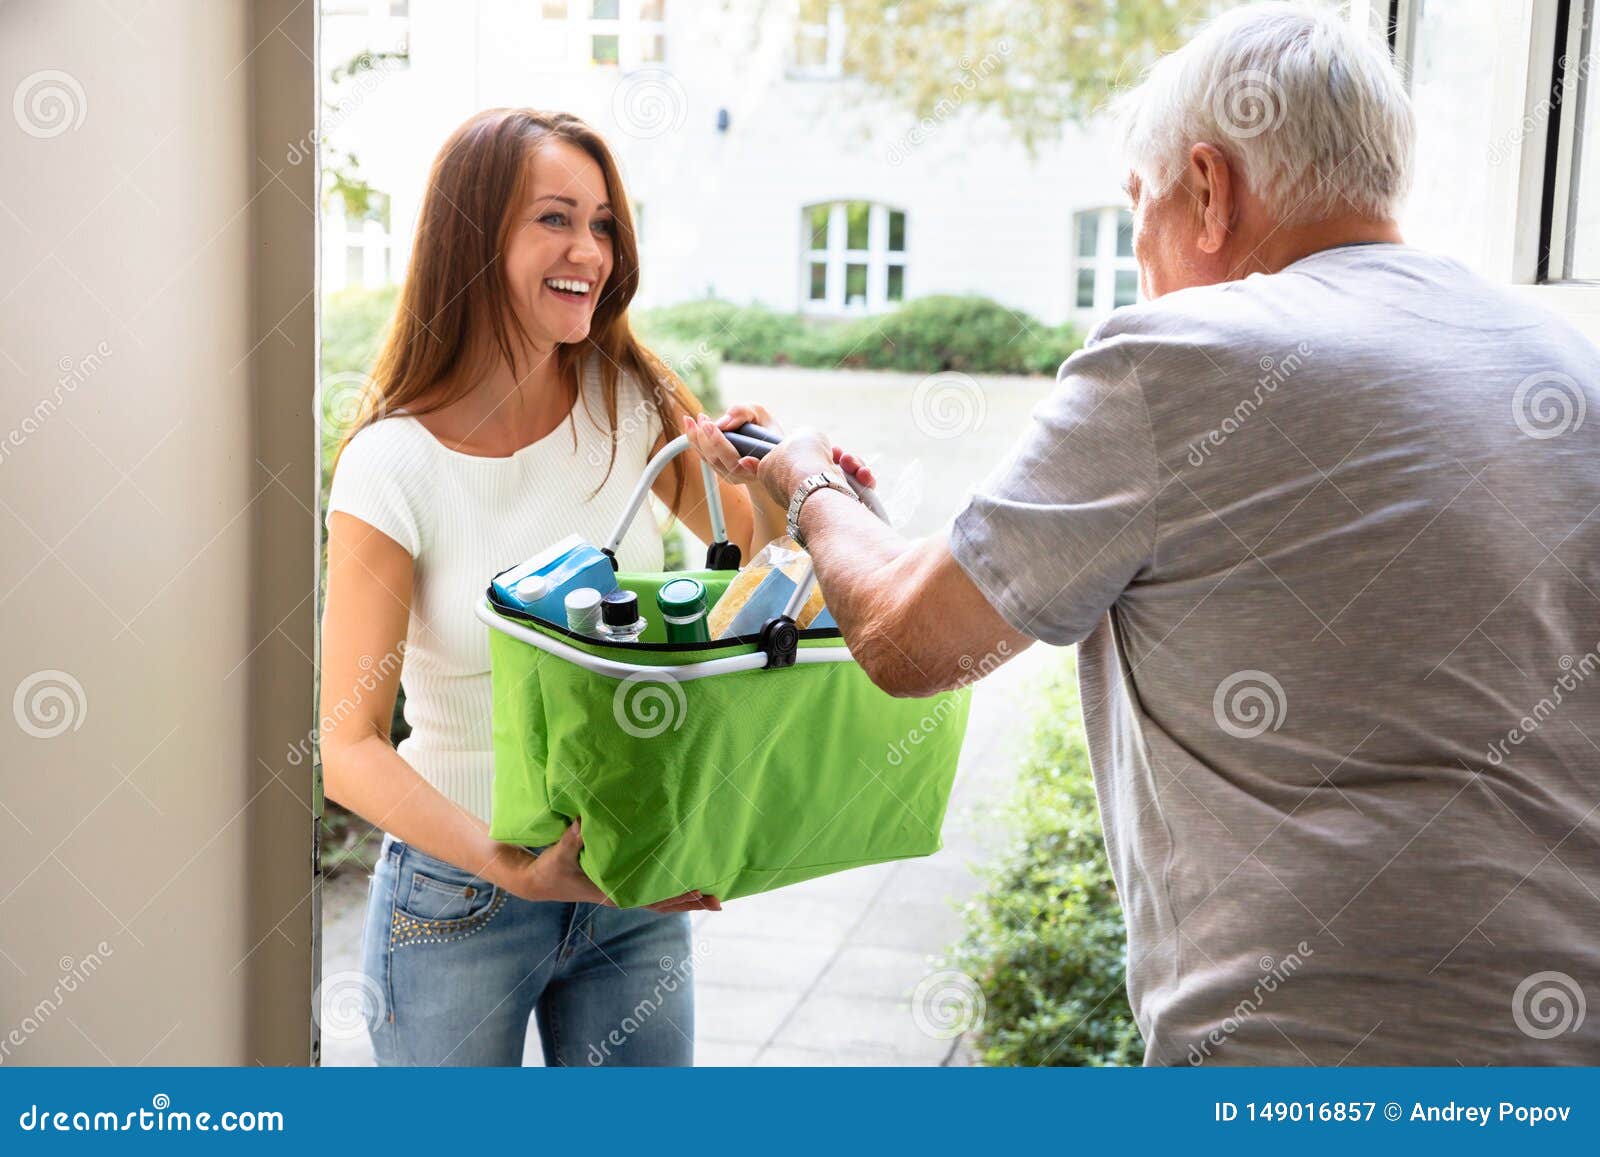 man offering help to his daughter carrying groceries